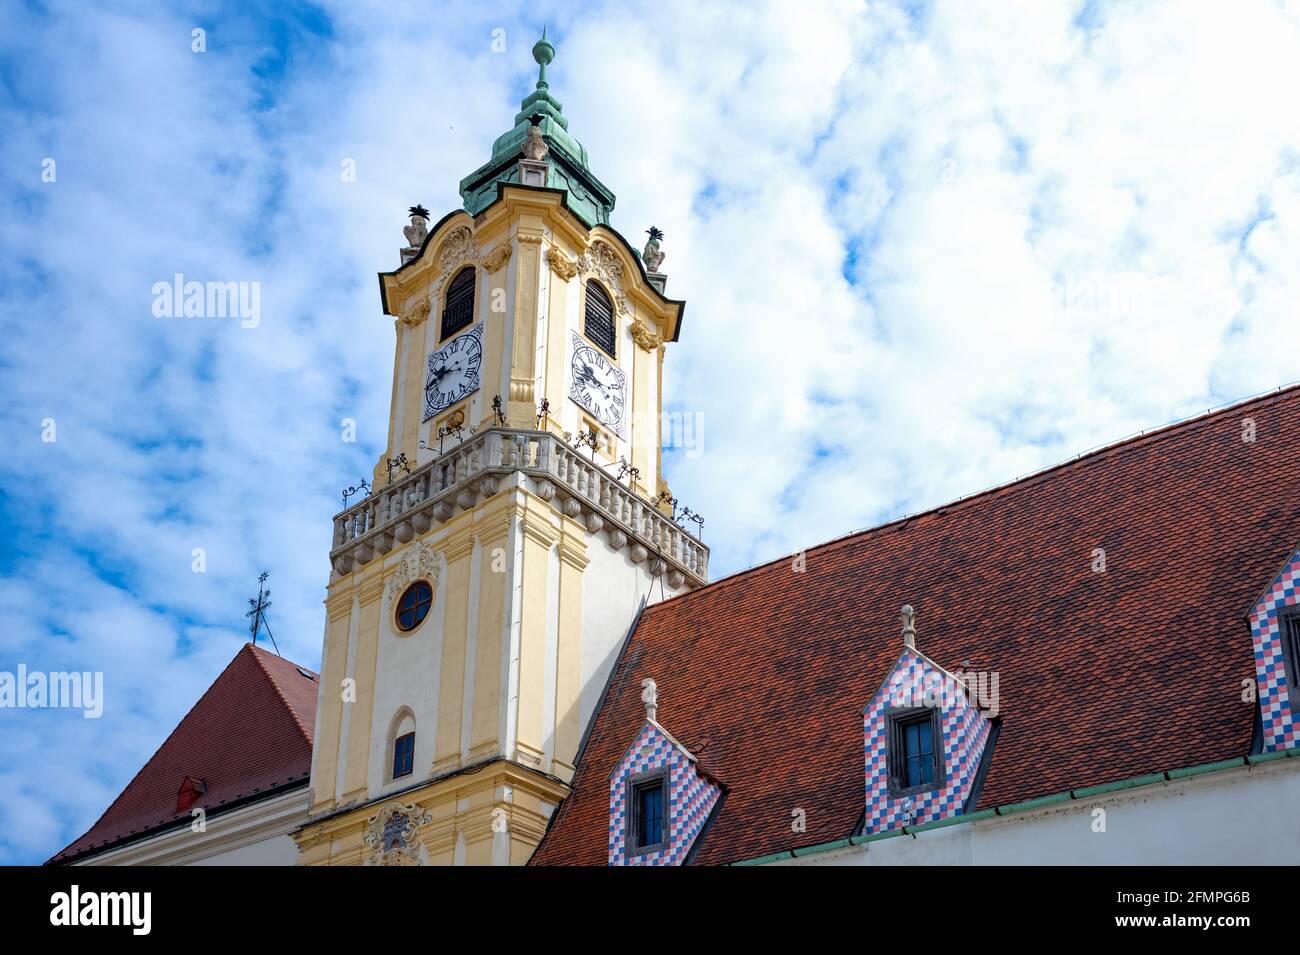 Bratislava, Slovakia, upward view of the clock tower of the old Town Hall in the cemtral Hlavne square Stock Photo